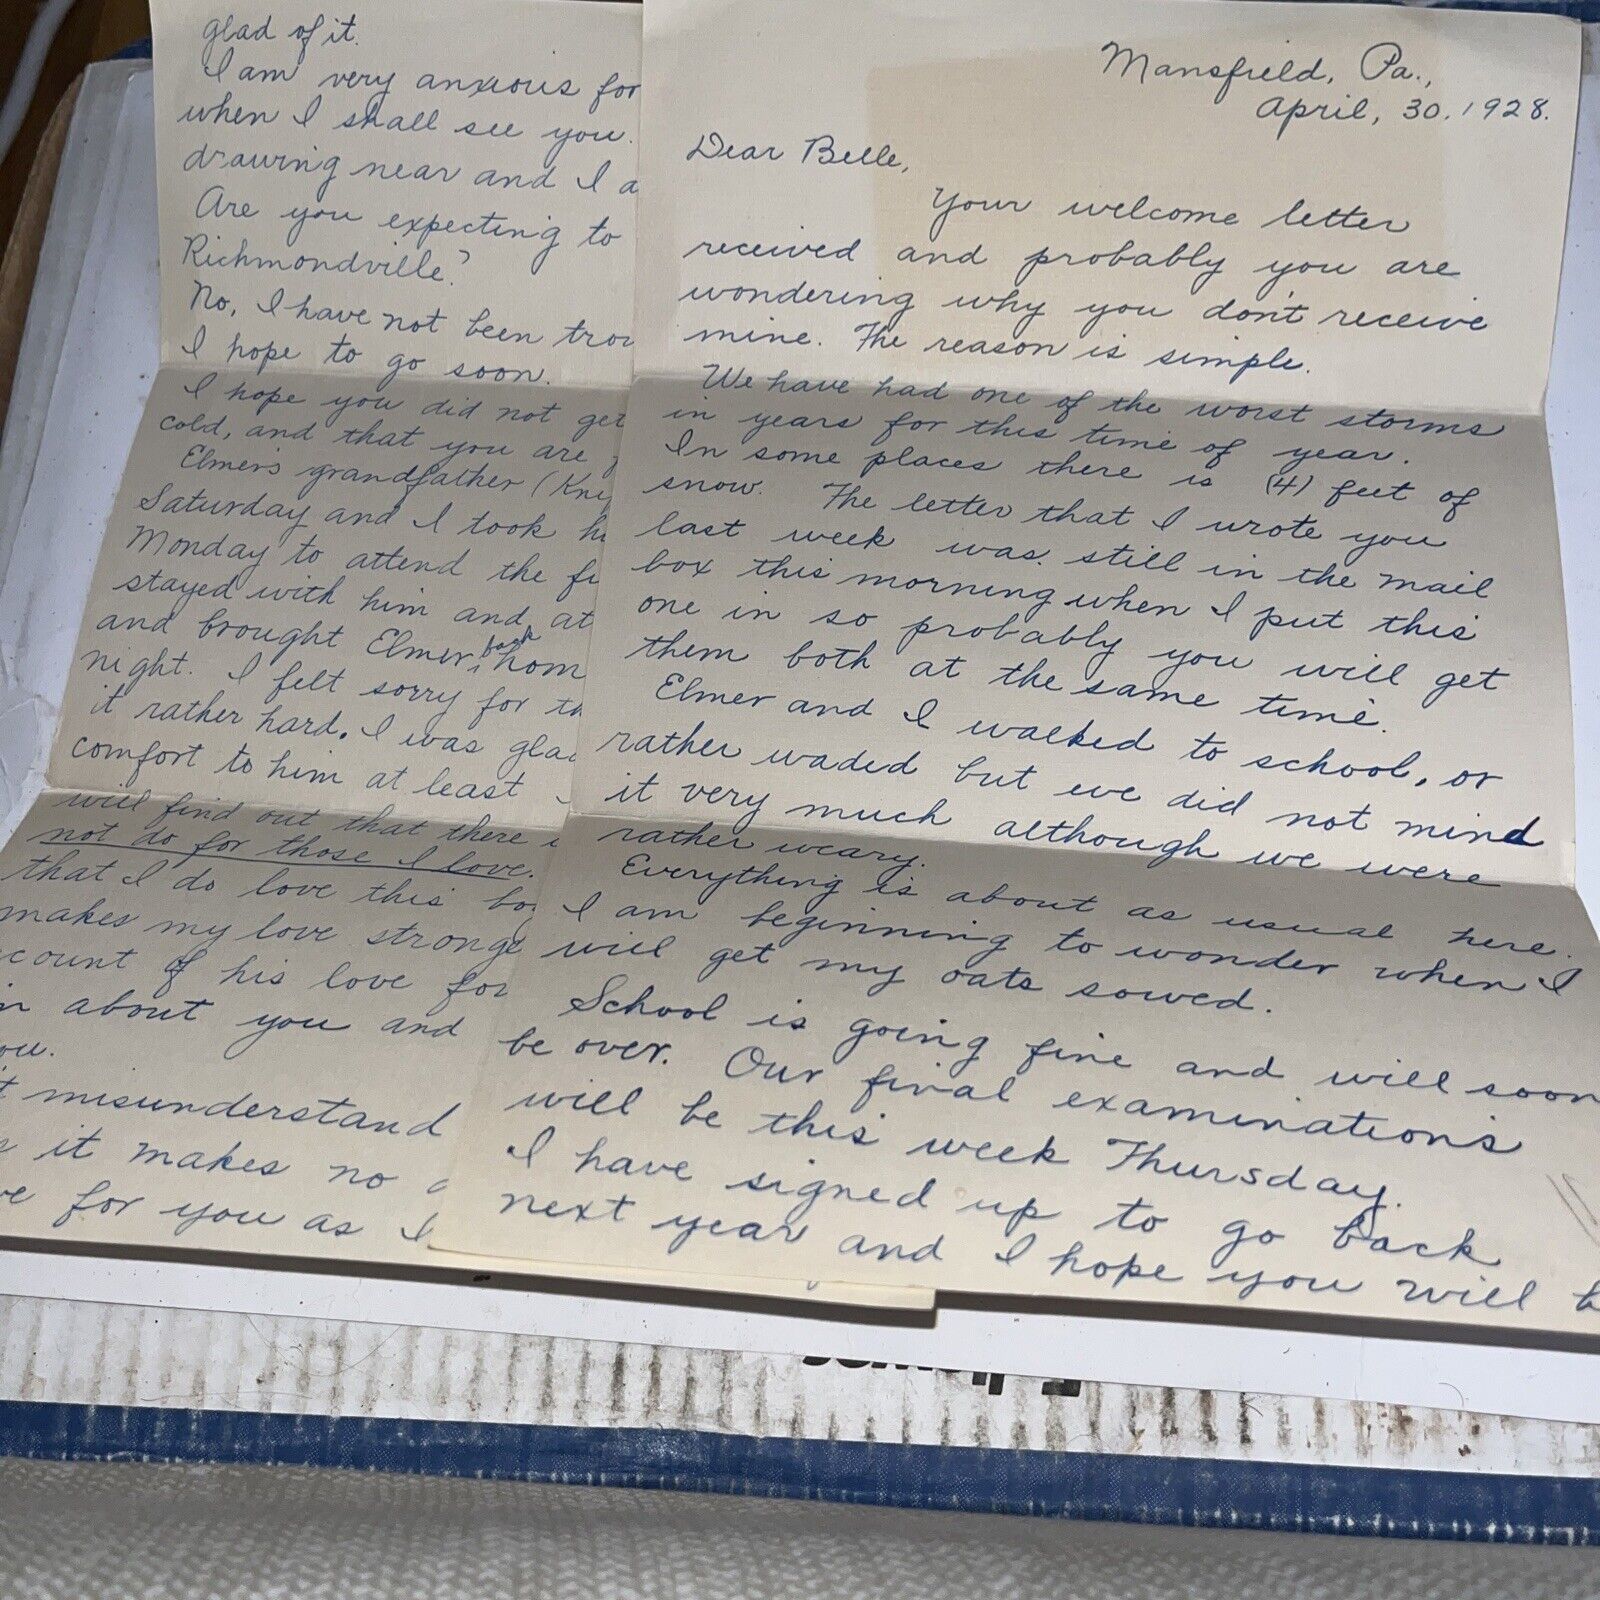 Antique 1928 Letter from Mansfield PA Tells of Historic 4 Foot April Snow Storm